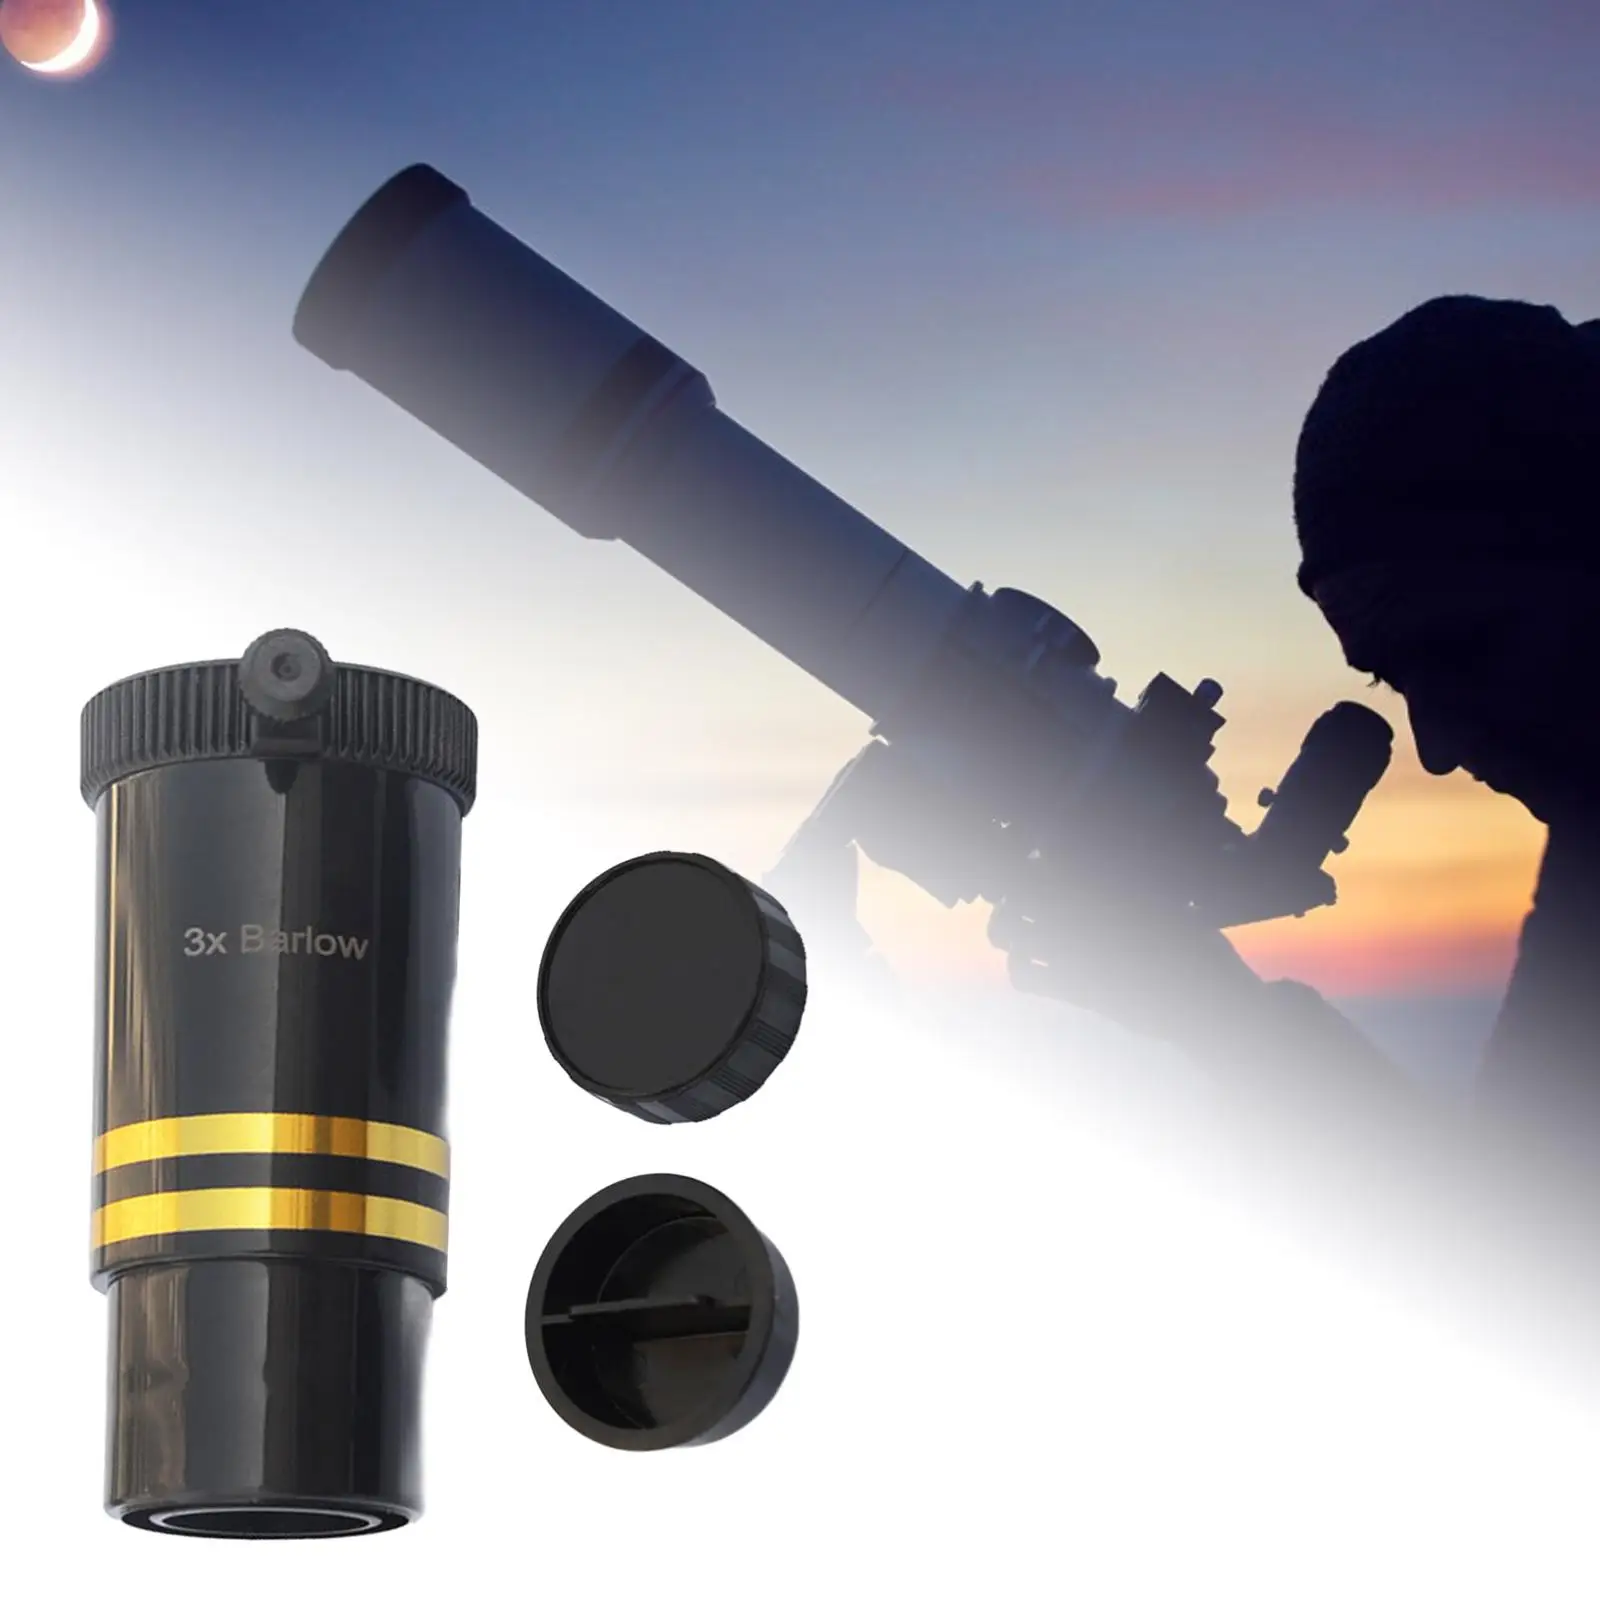 Barlow Lens 3x Multi Coated 1.25 inch Telescope Accessories Telescope Barlow Lens for Astronomical Visual Astronomy Photography